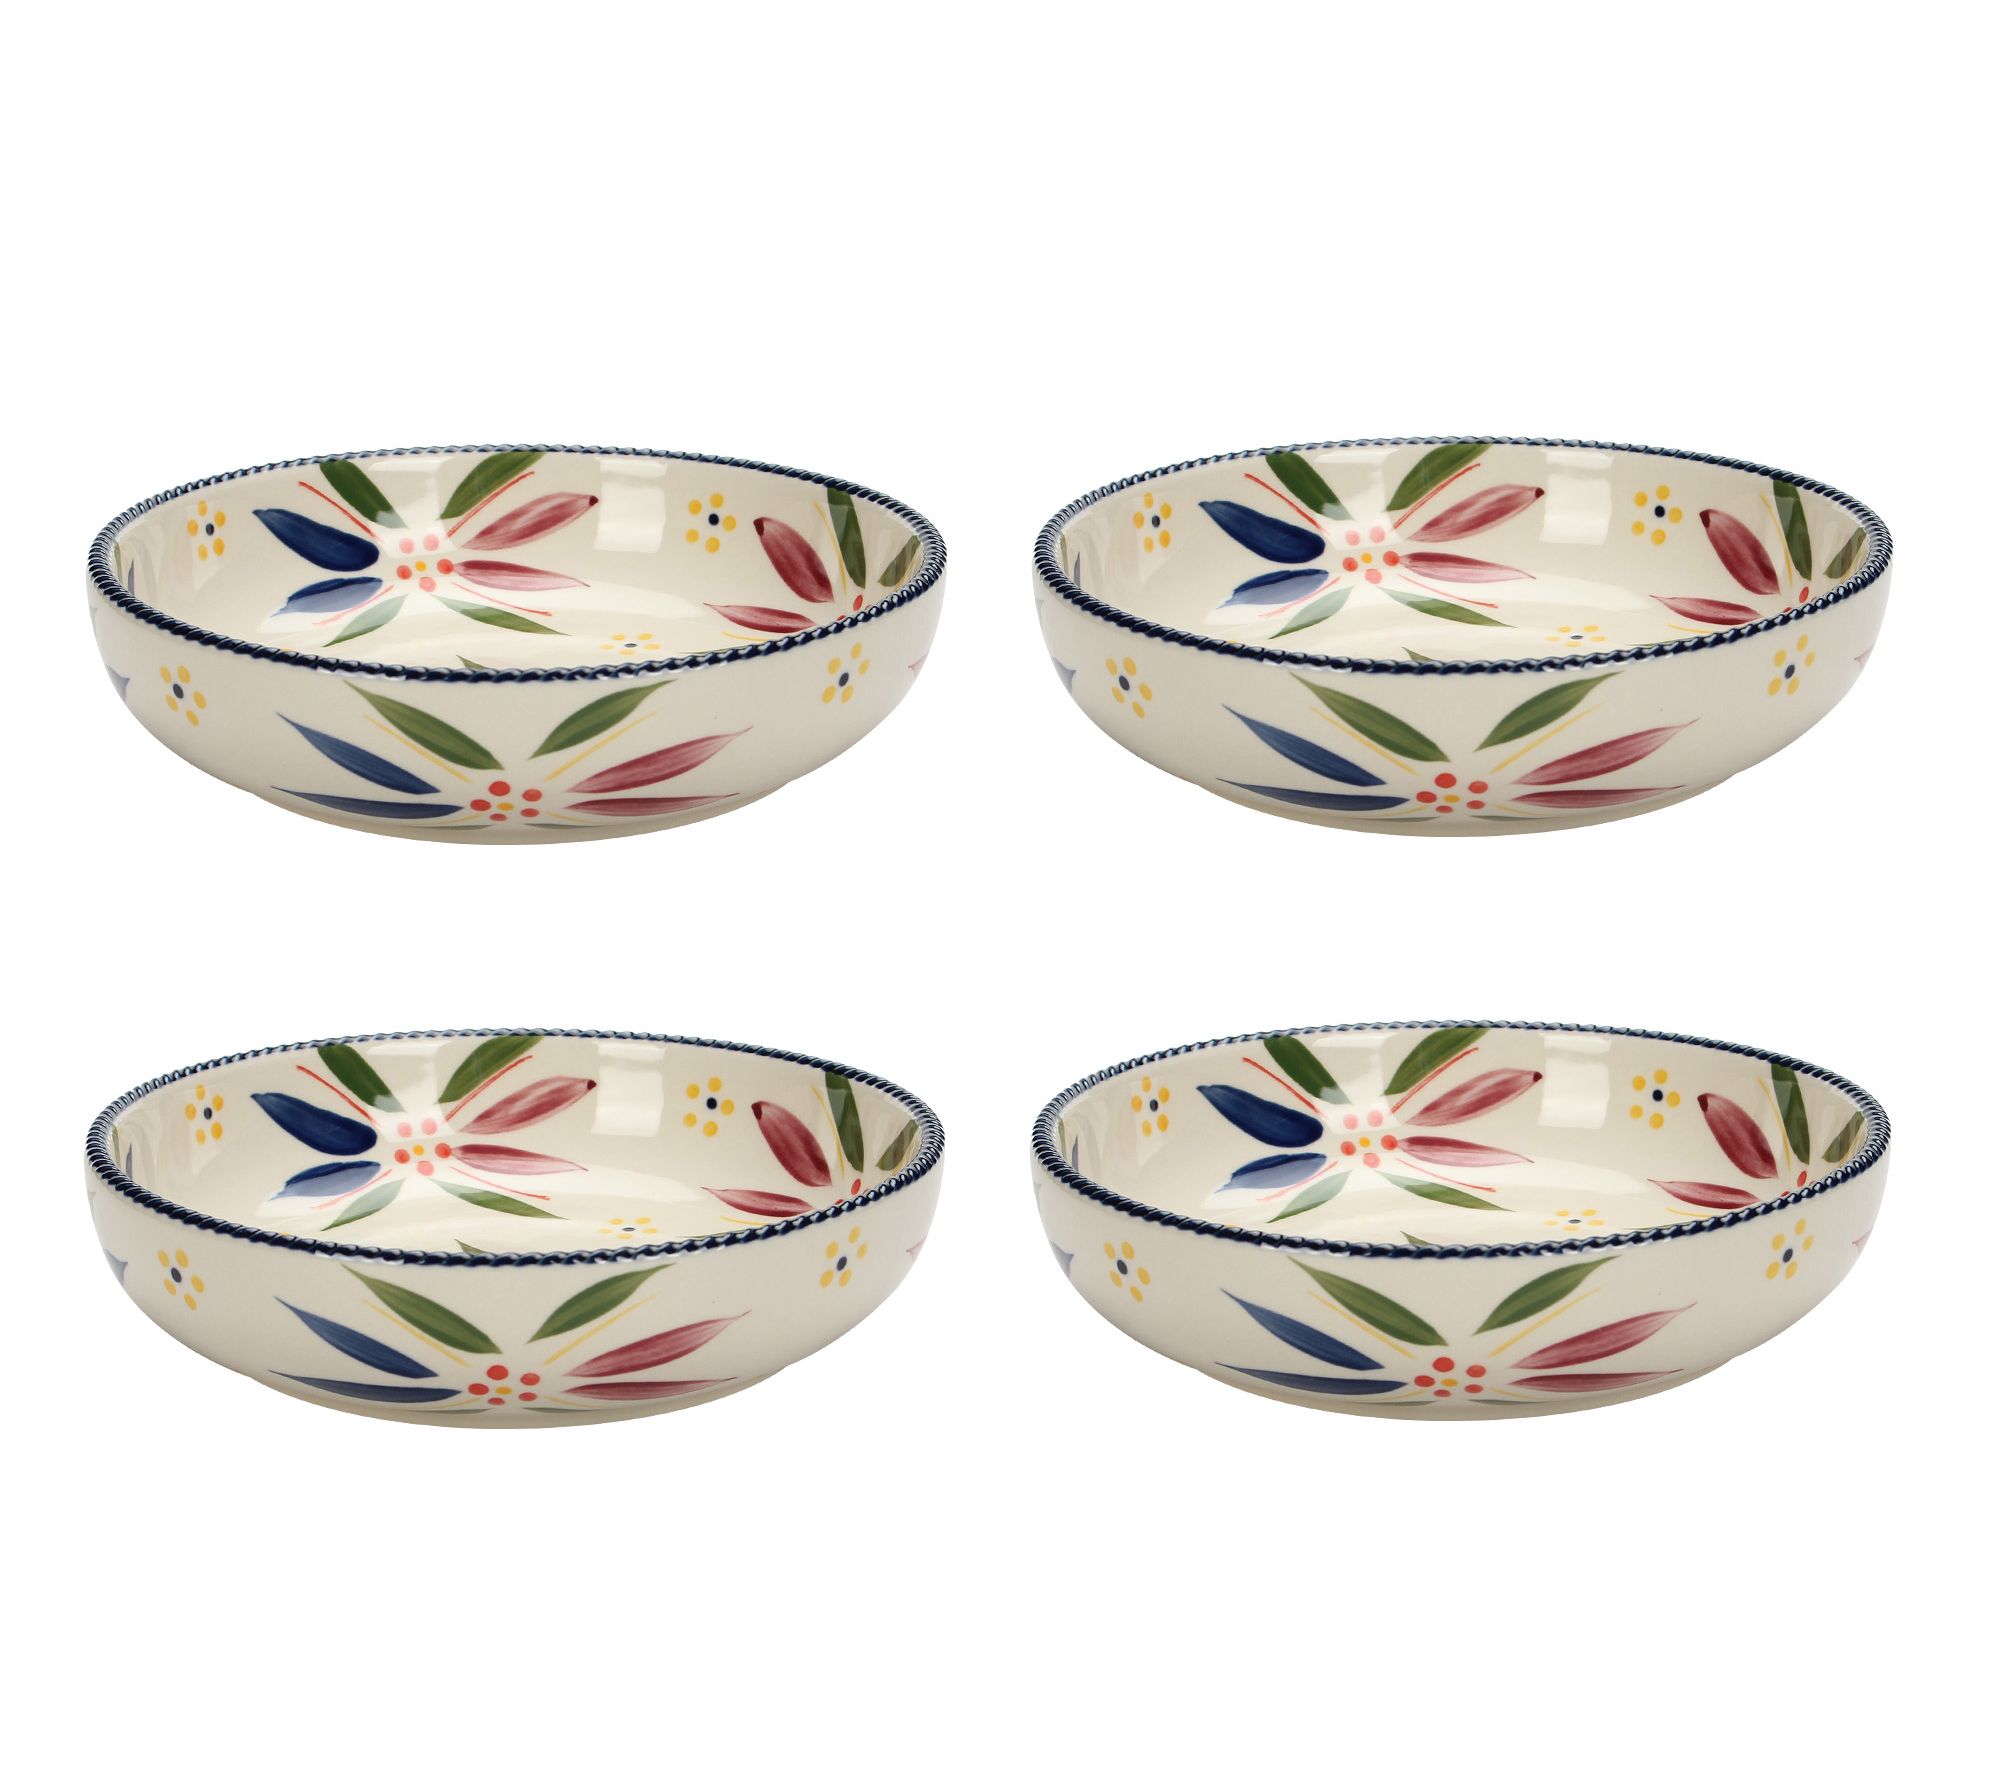 Cool-It Bowl - Insulated Bowls - Radleys